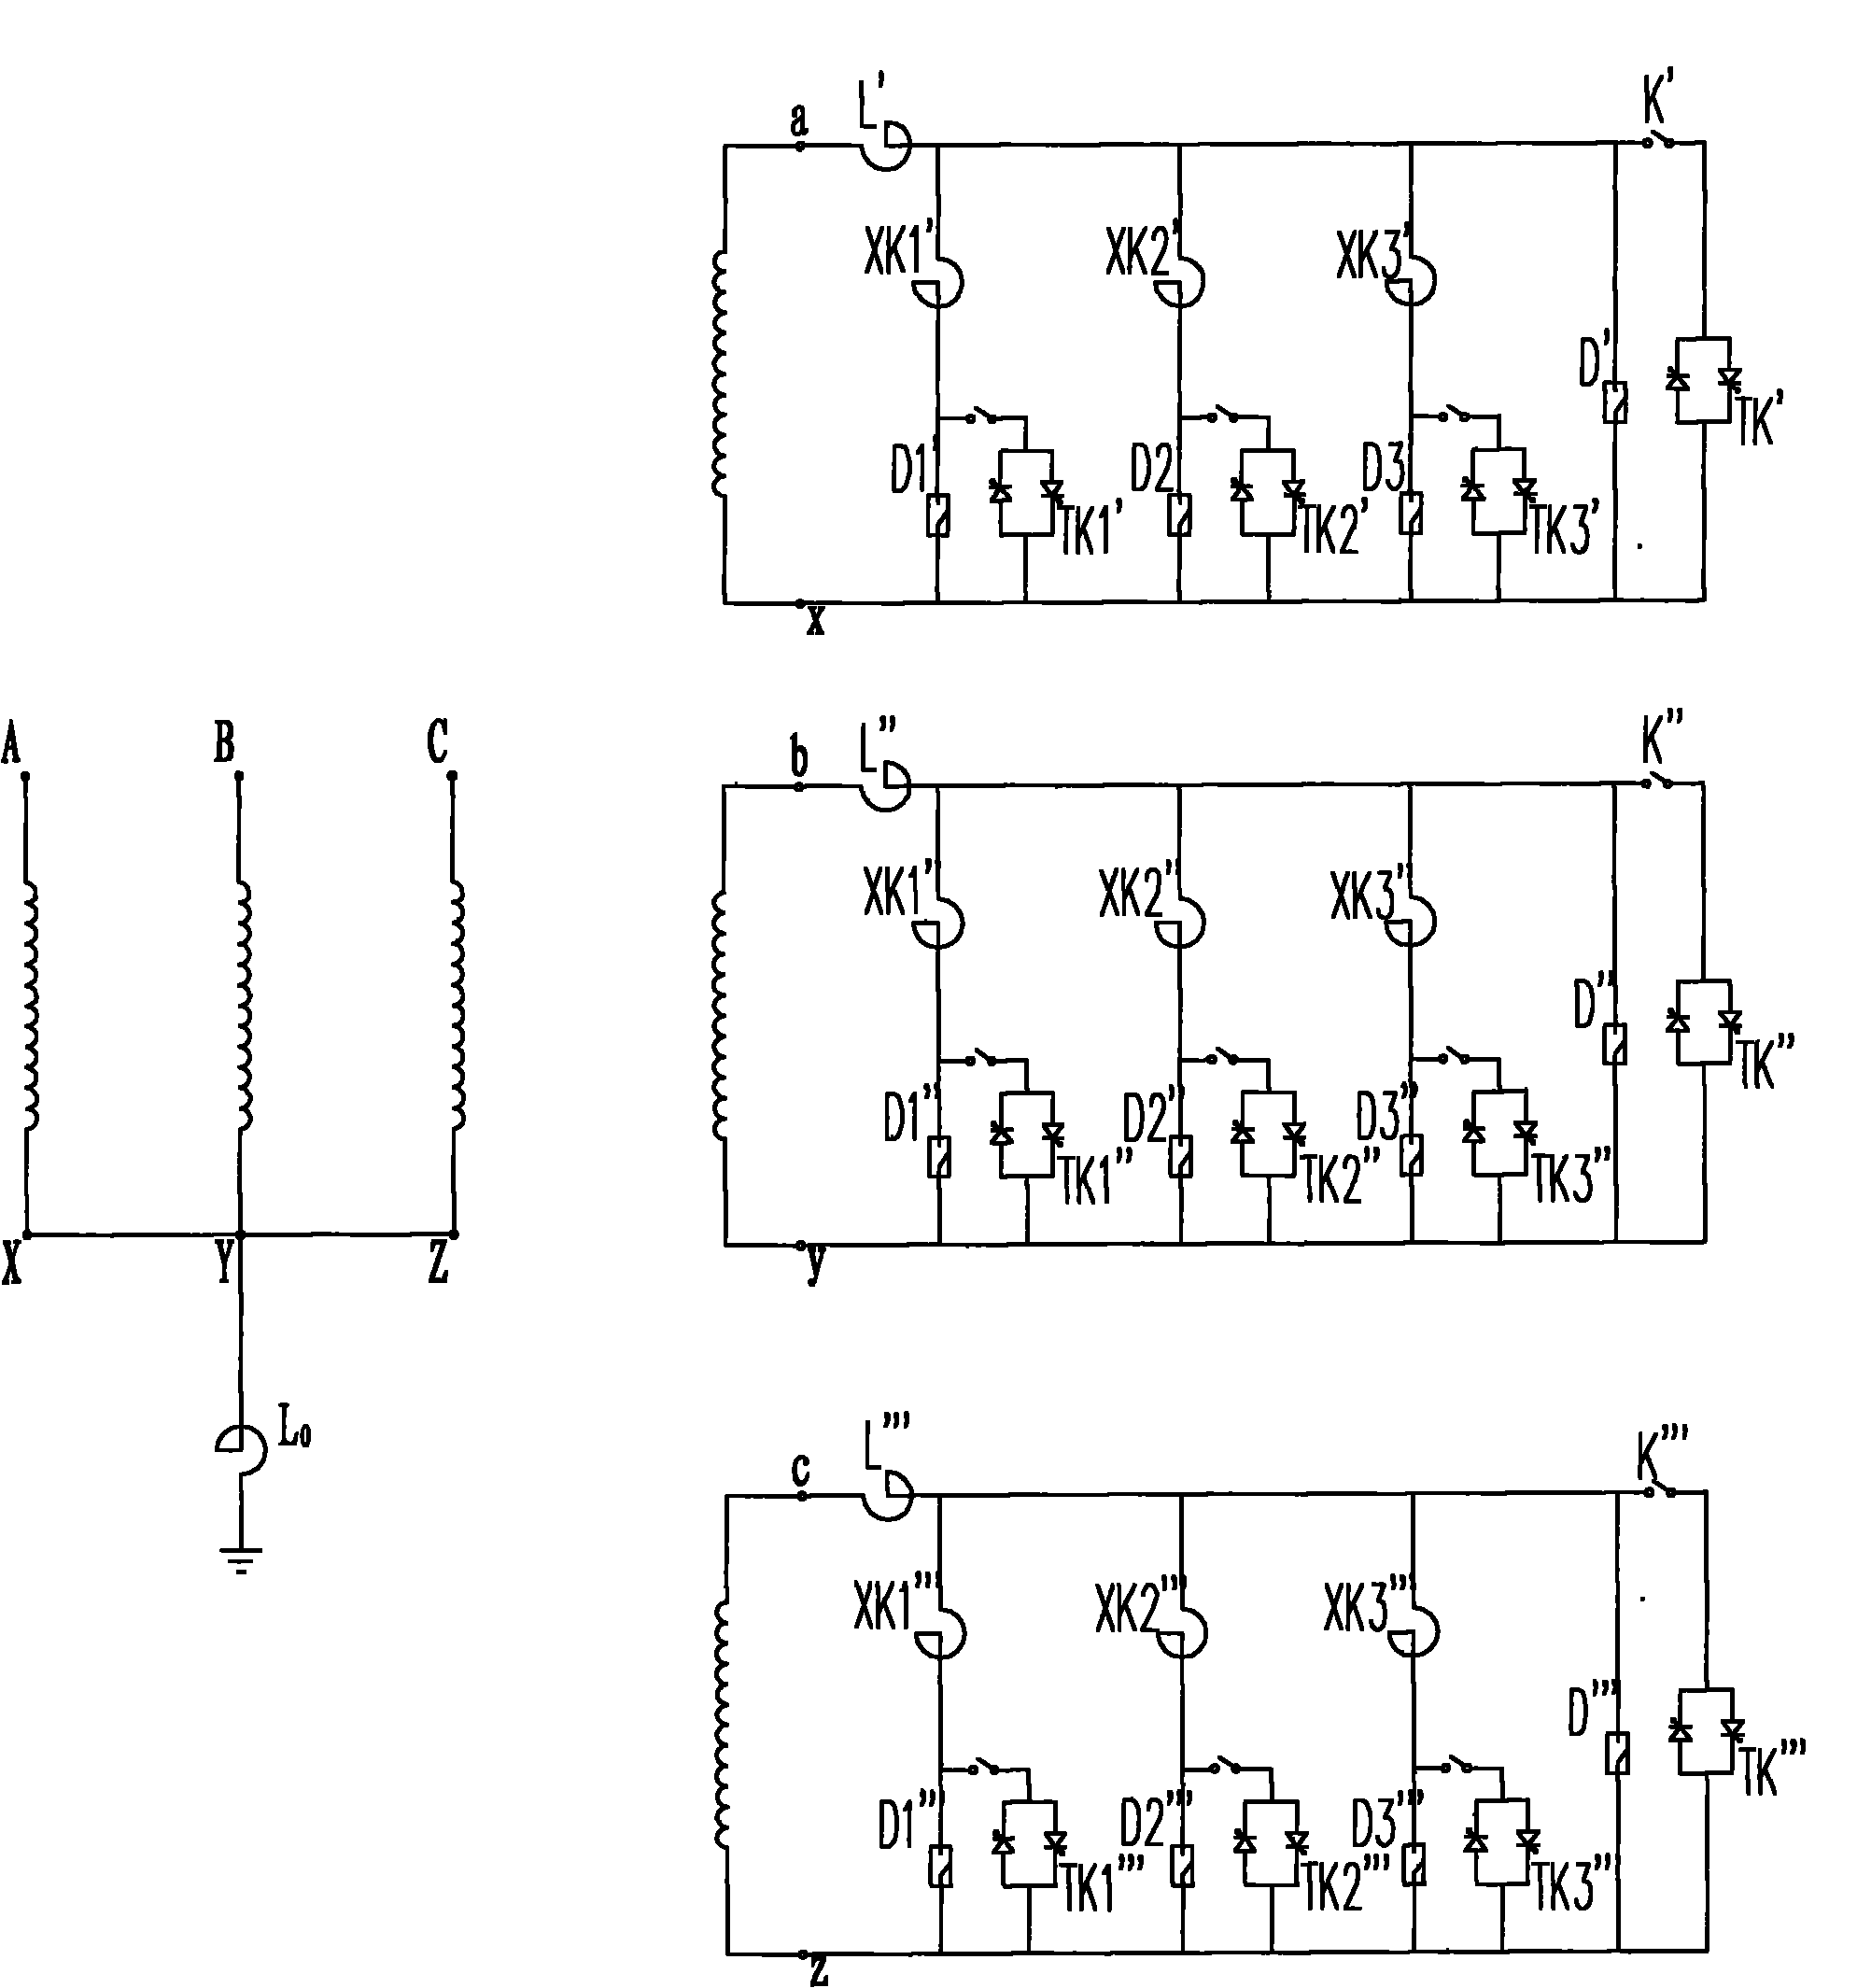 Alternating current (AC) stepped controllable single-phase/three-phase shunt reactor